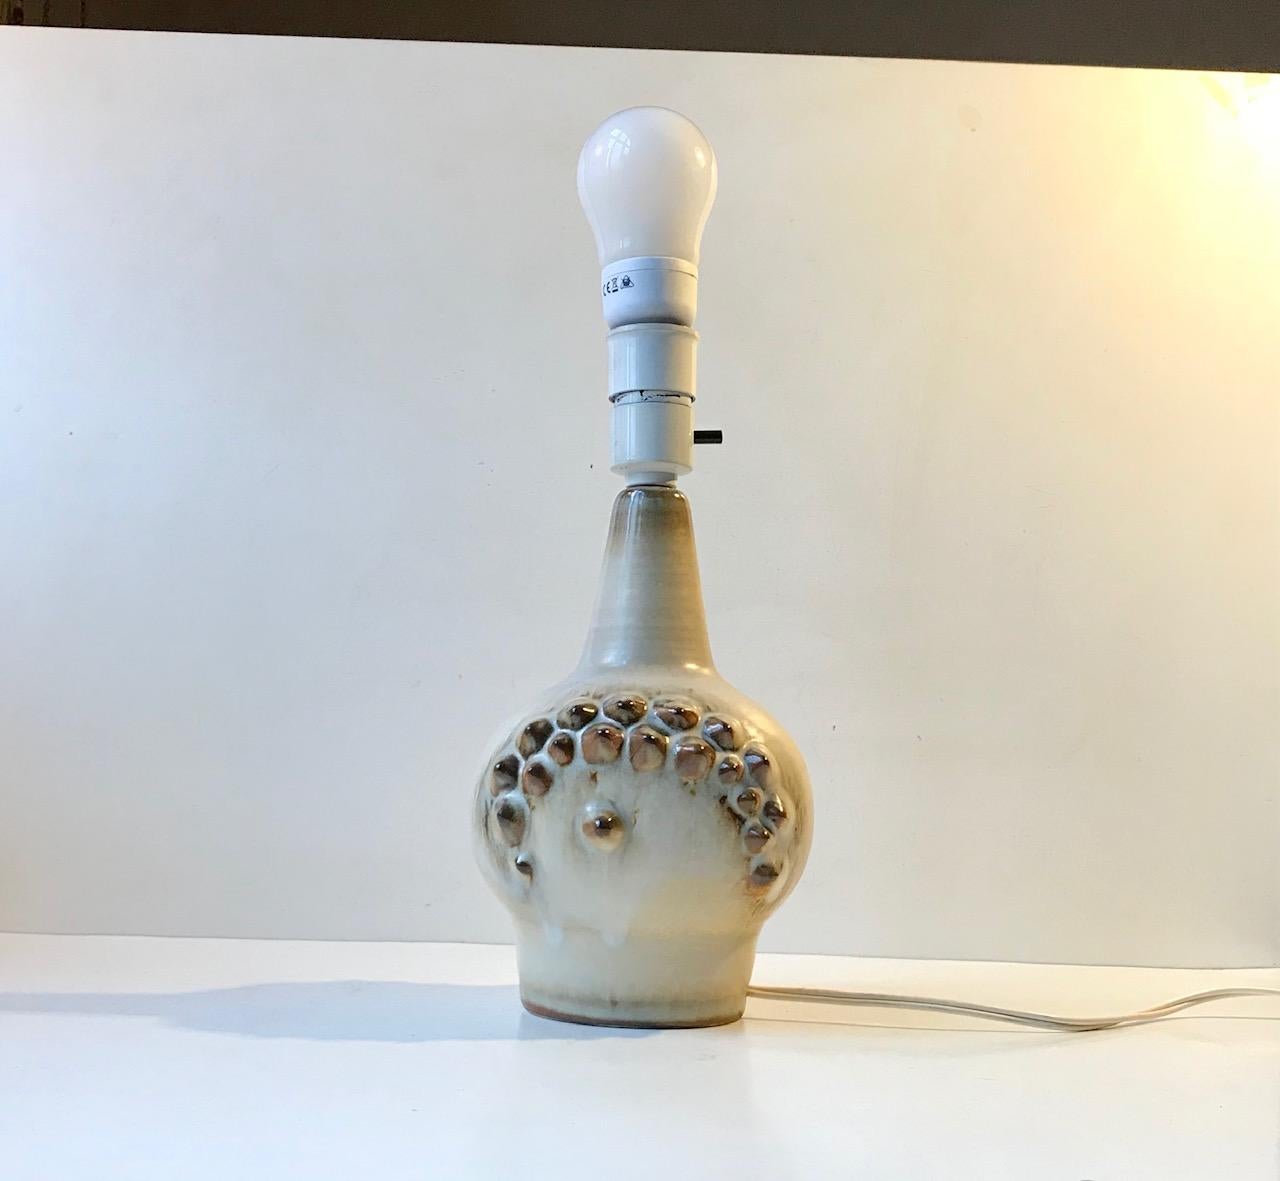 Scandinavian Modern Ceramic Table Lamp with Spikes by Einar Johansen for Søholm, 1960s For Sale